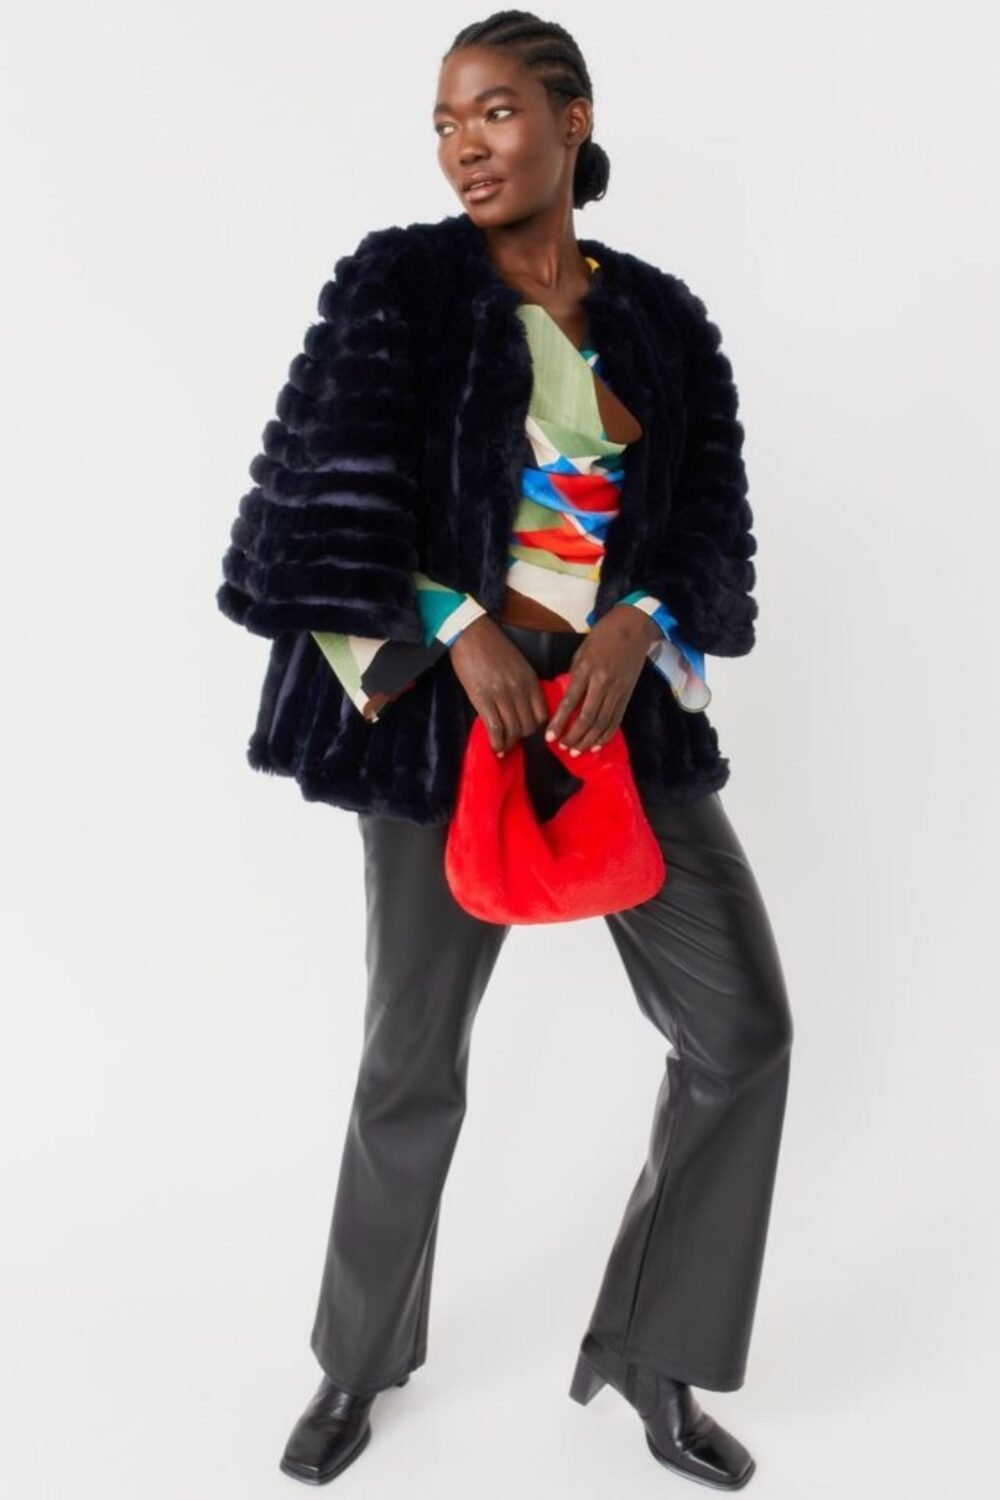 Shop Lux Navy Faux Fur Striped Coat and women's luxury and designer clothes at www.lux-apparel.co.uk